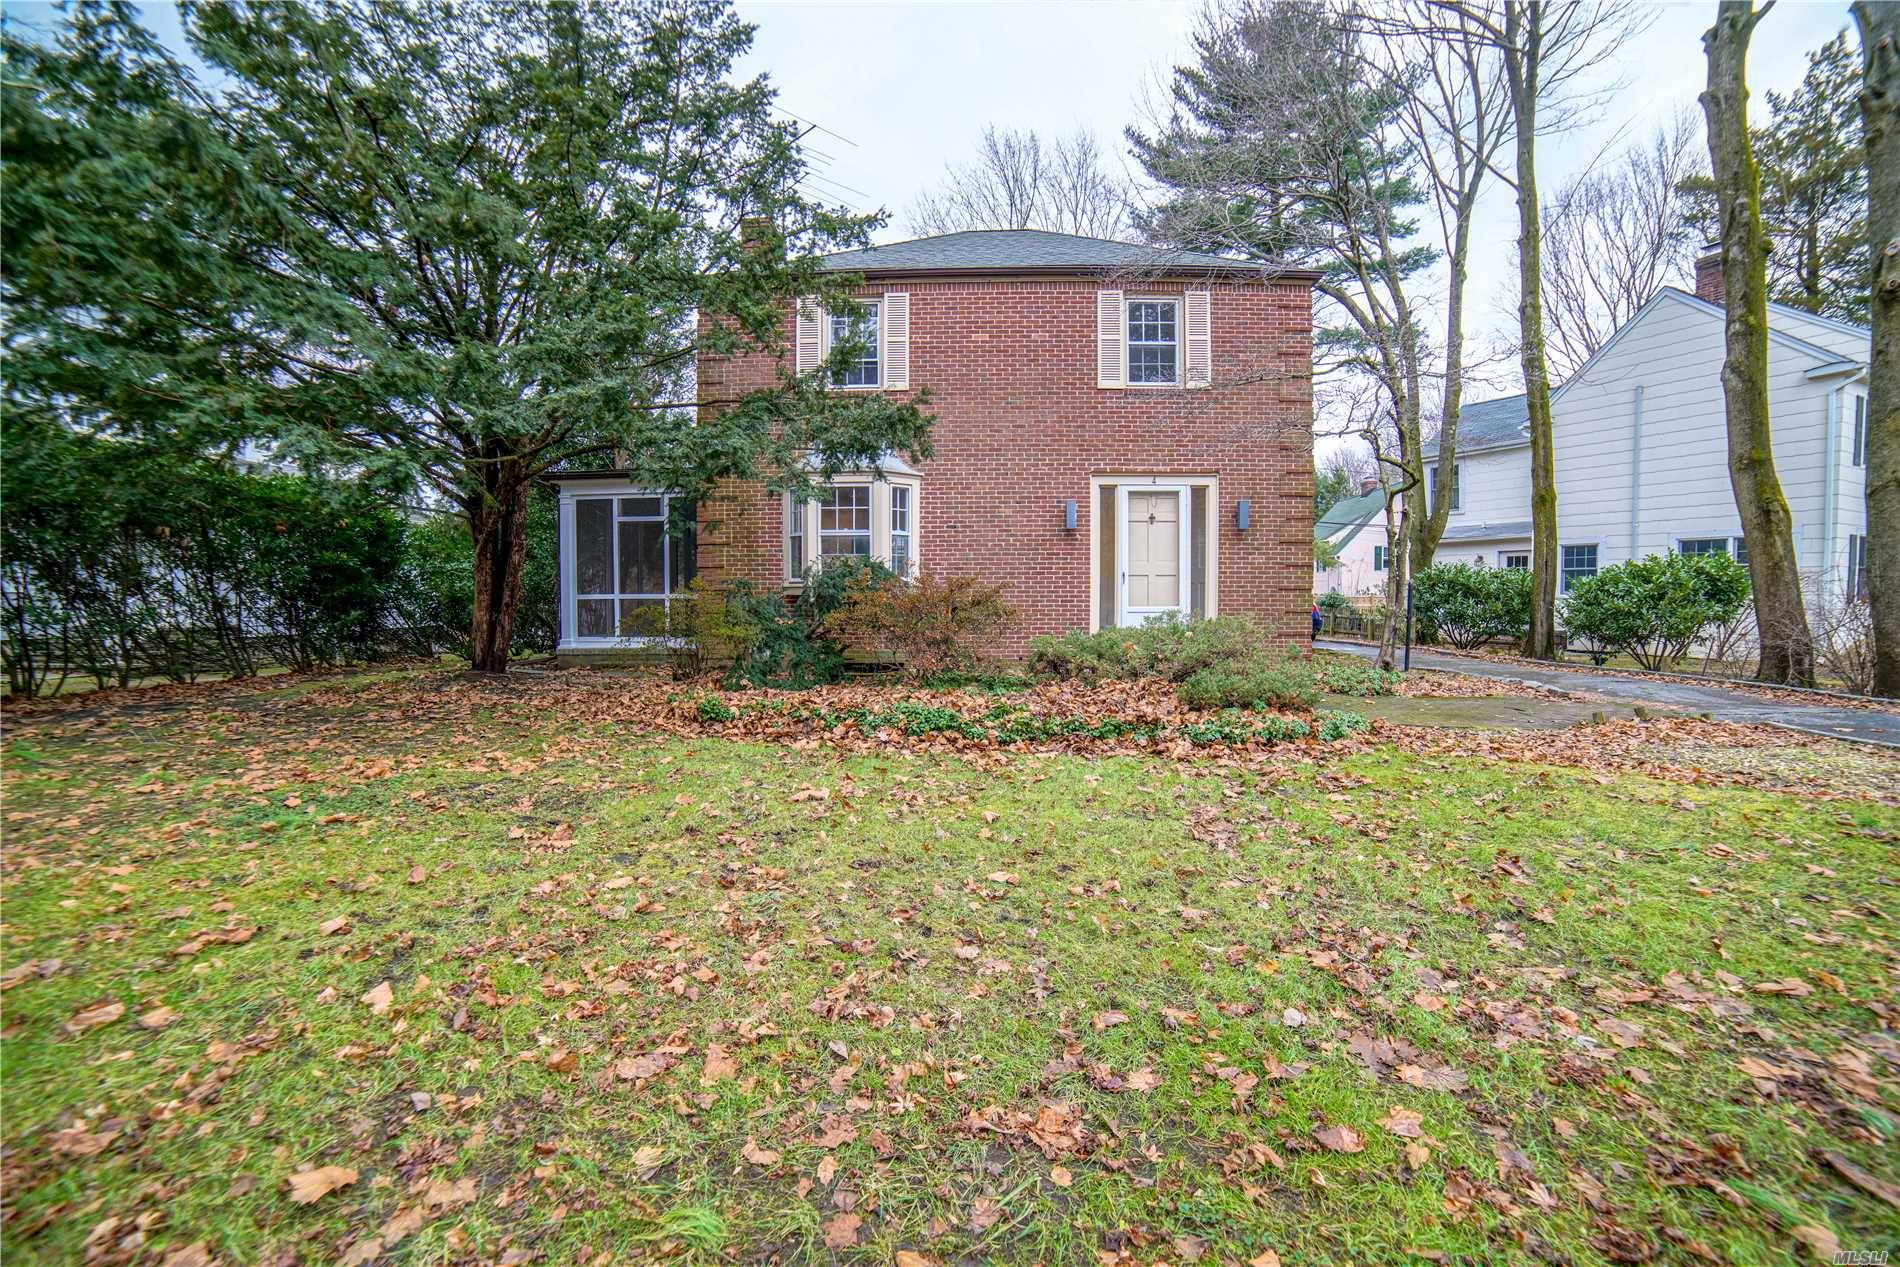 Charming Beacon Hill Brick Colonial Located On A Quiet Mid Block Location, Hardwood Floors Thruout With High Ceilings, Living Room With Screened In Porch, Formal Dining Room, Eik, 3 Bedrooms ...